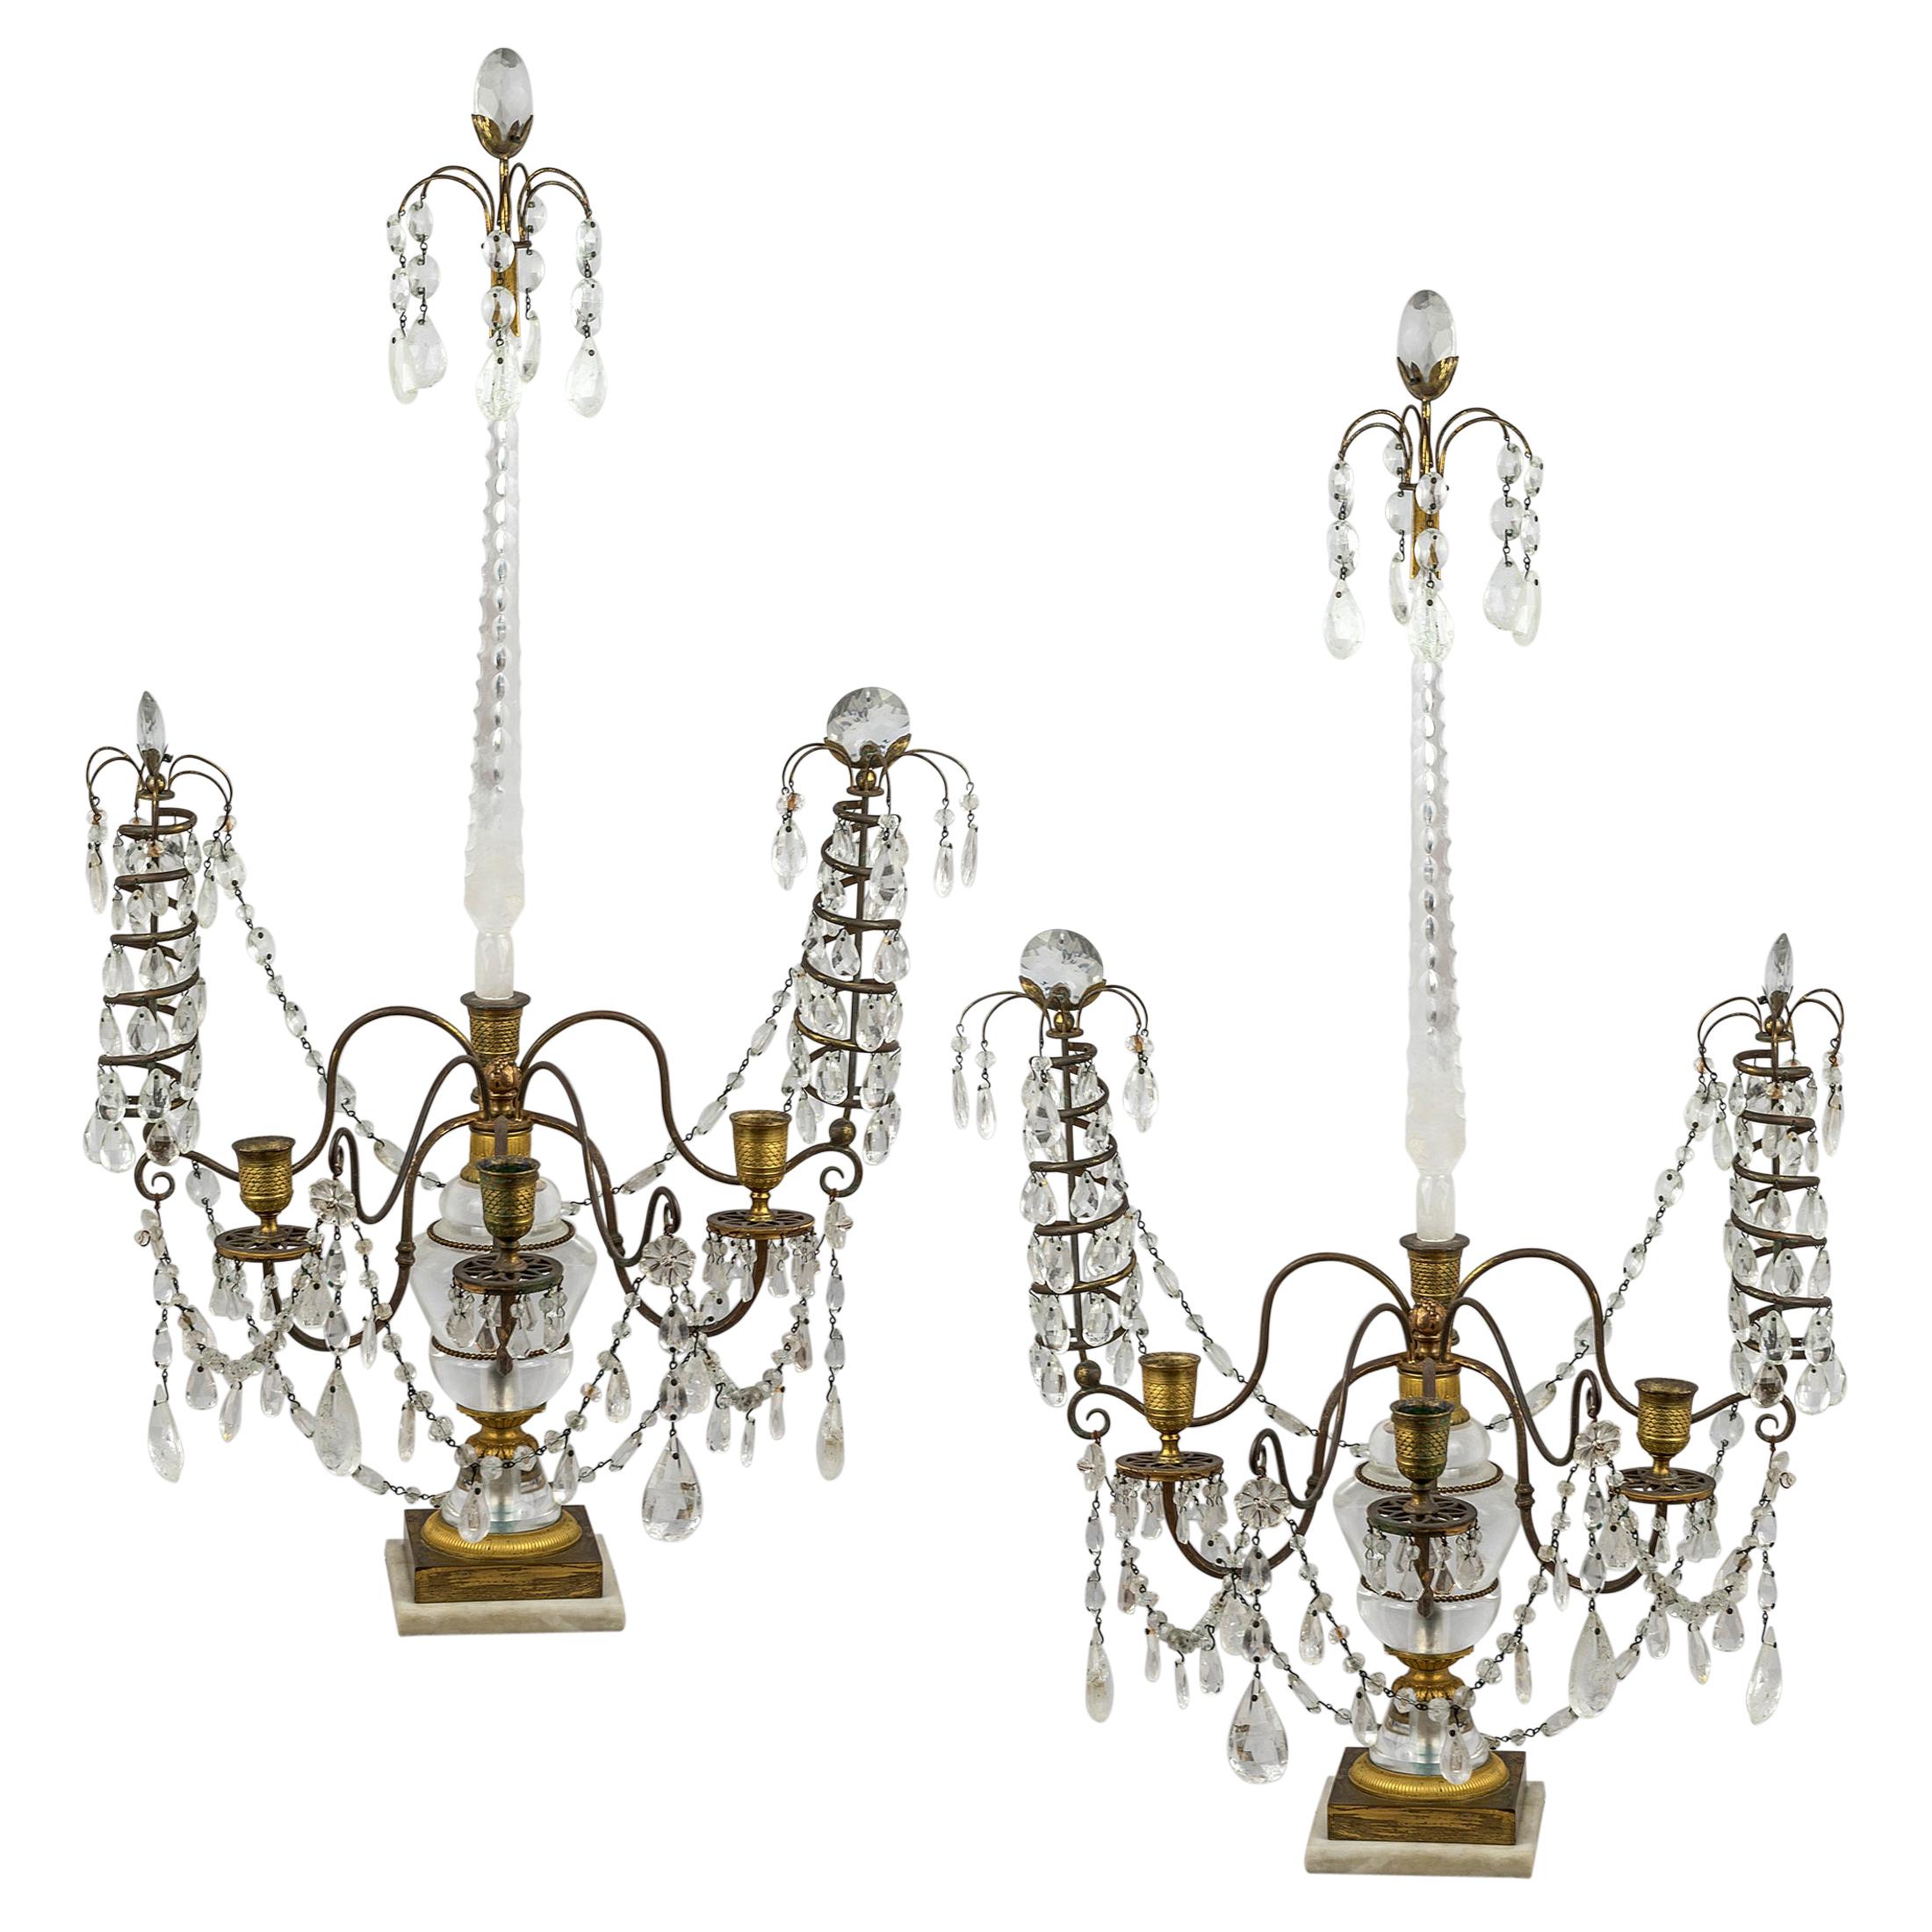 Cut Glass Mounted Ormolu, Rock Crystal and White Marble Three-Light Candelabras